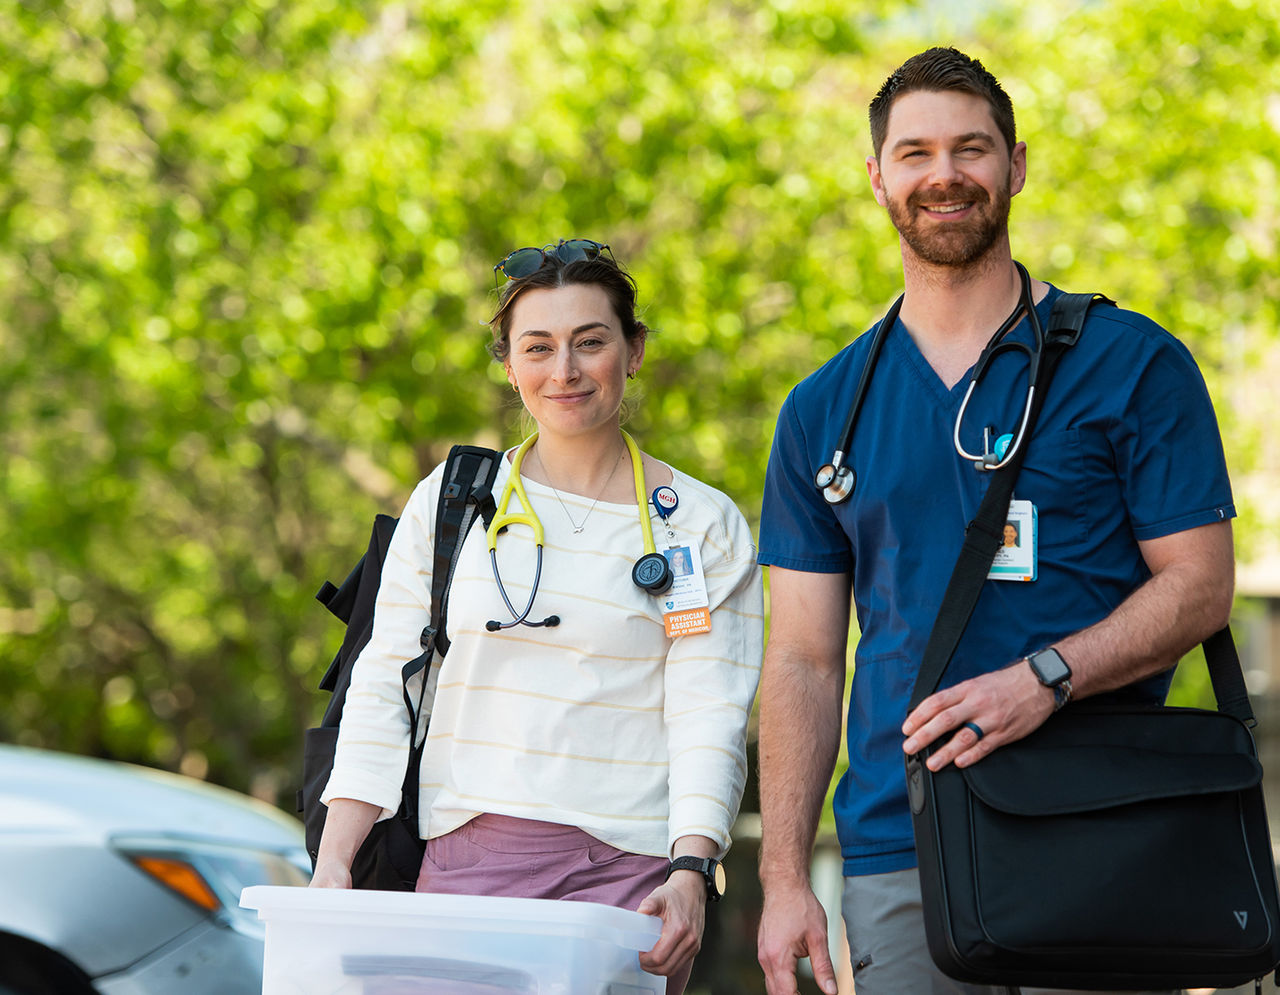 Two providers in an outdoor setting, smiling at the camera. They are wearing scrubs and carrying medical equipment.